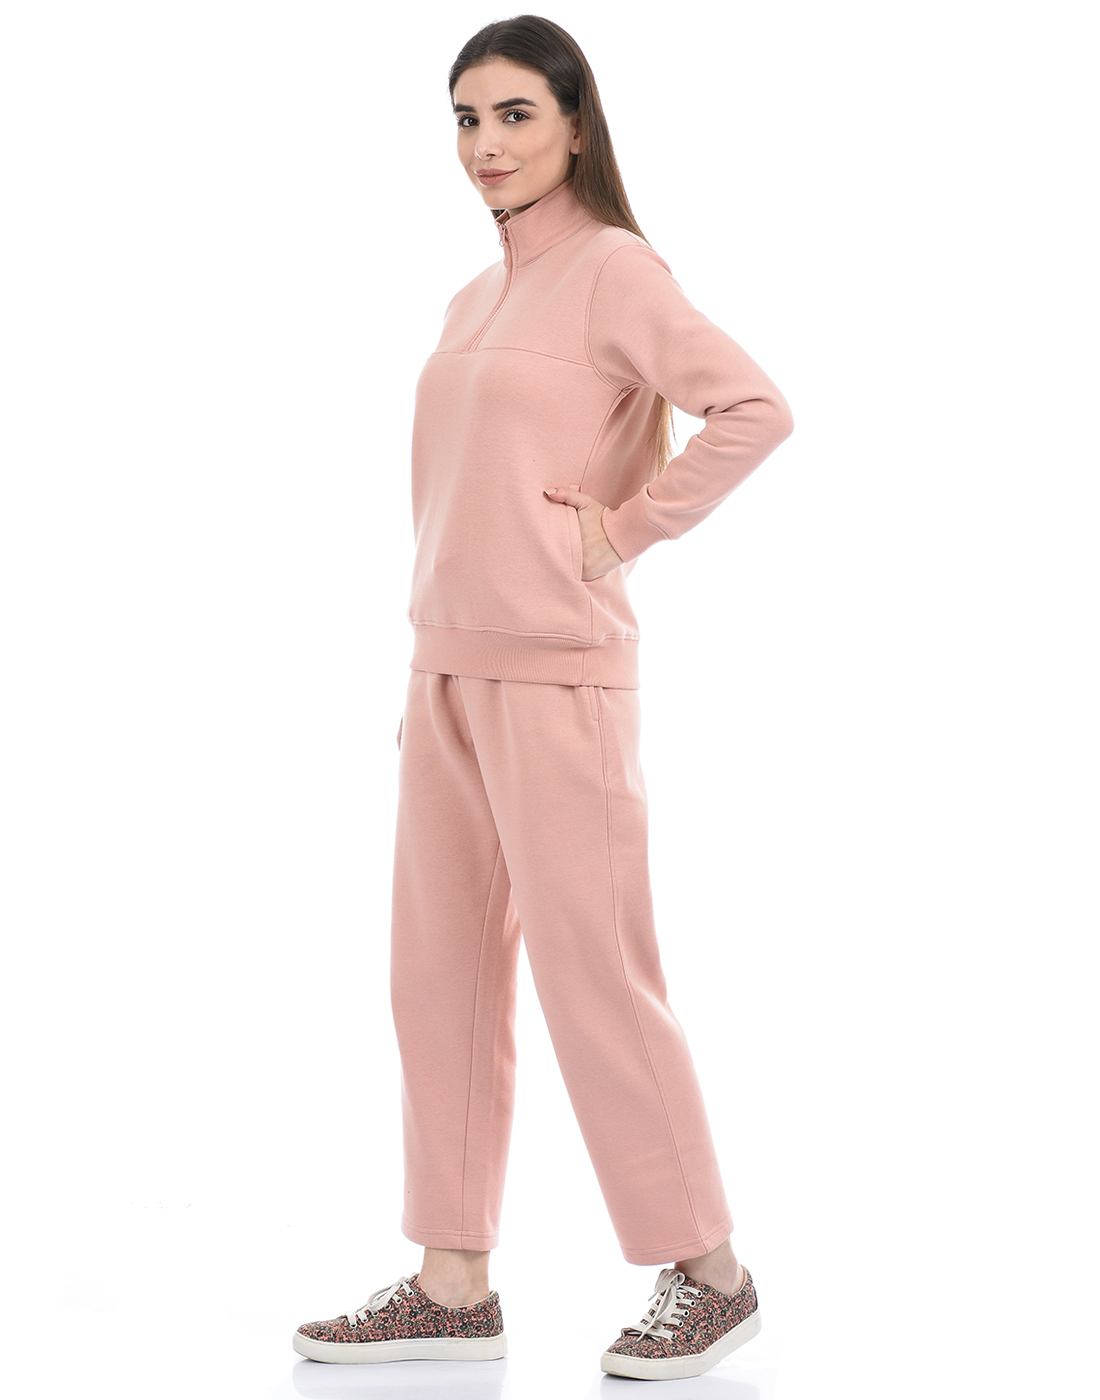 ONEWAY Women Solid Pink Track Suit